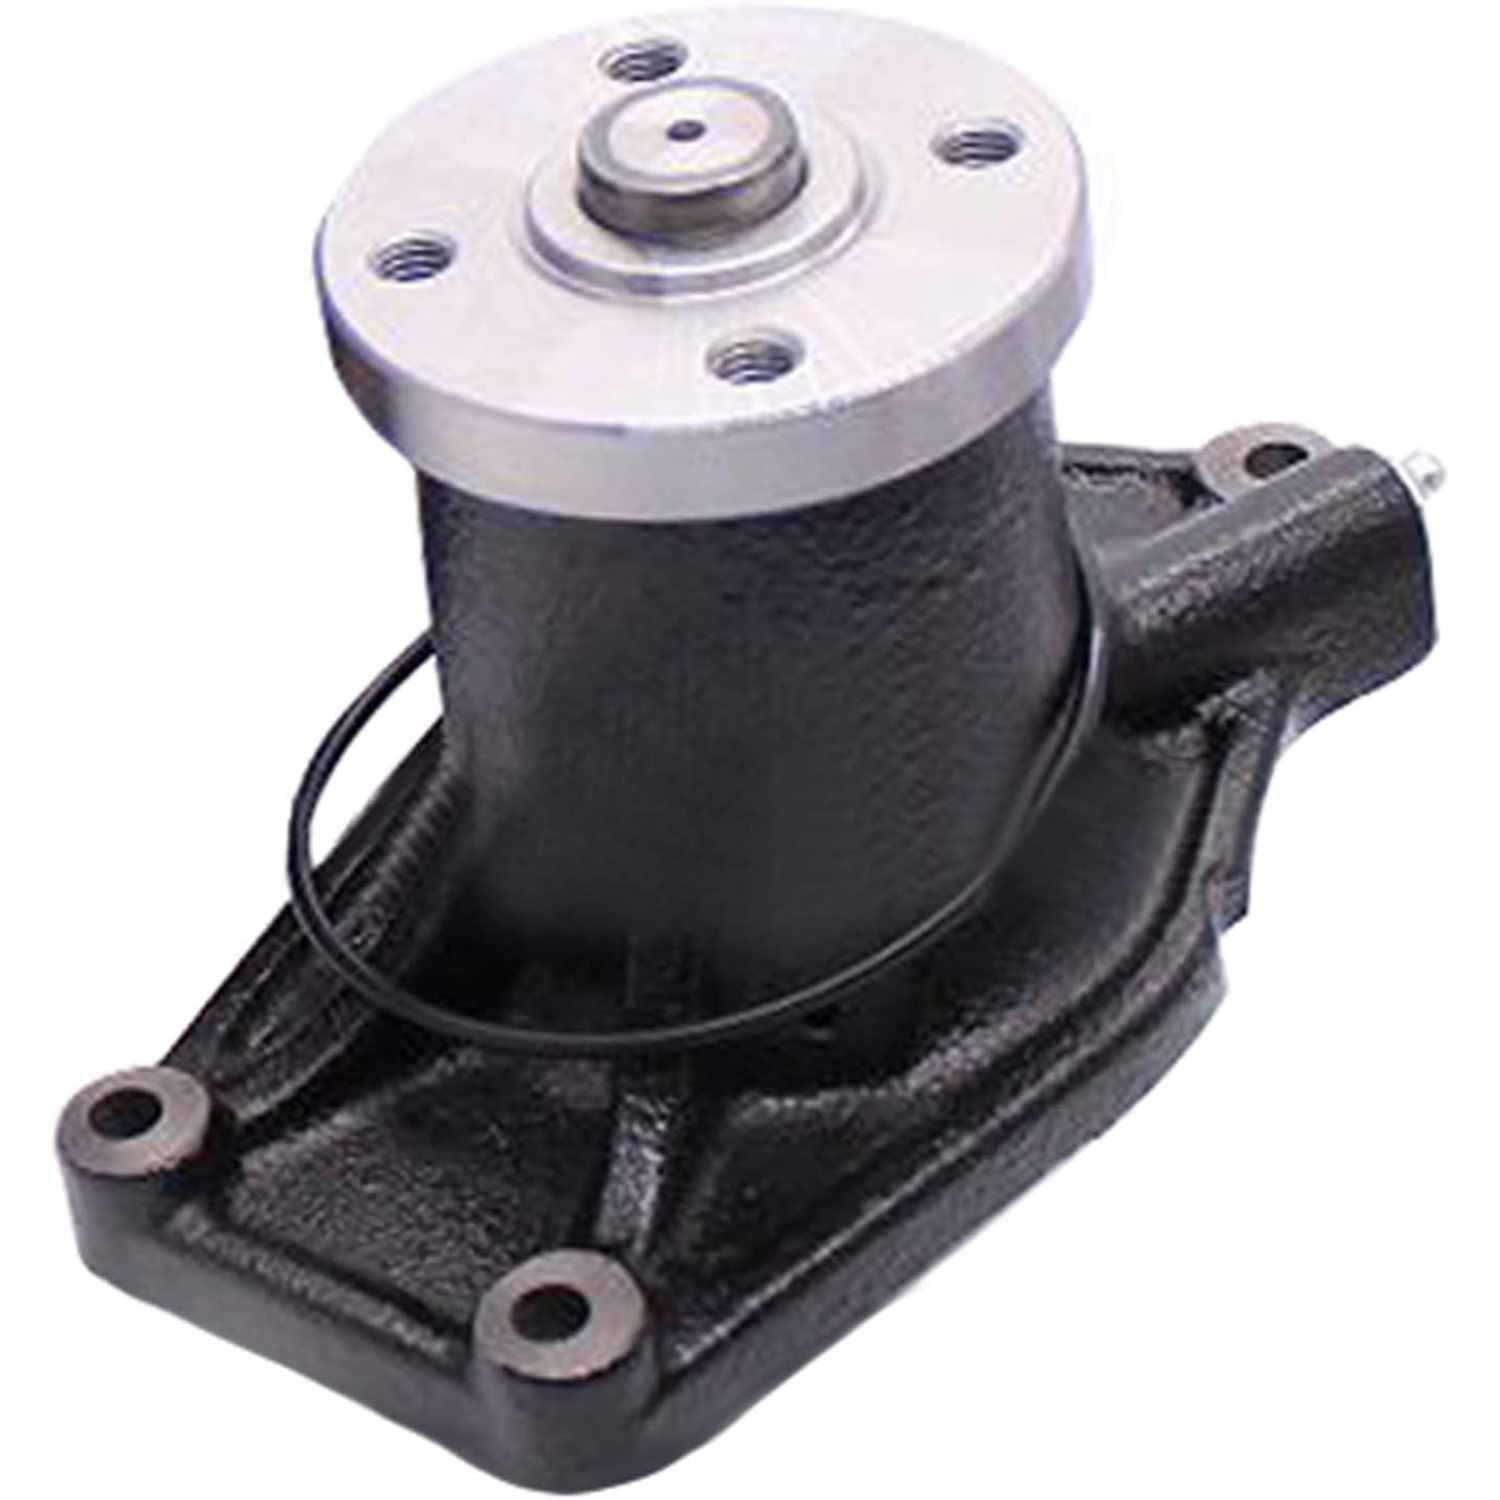 Water Pump VAME993520 Fit for Kobelco ED190LC-6E SK160LC-6E SK160LC-6E SK200-6ES SK210LC-6E SK235SR-1E Excavator - KUDUPARTS